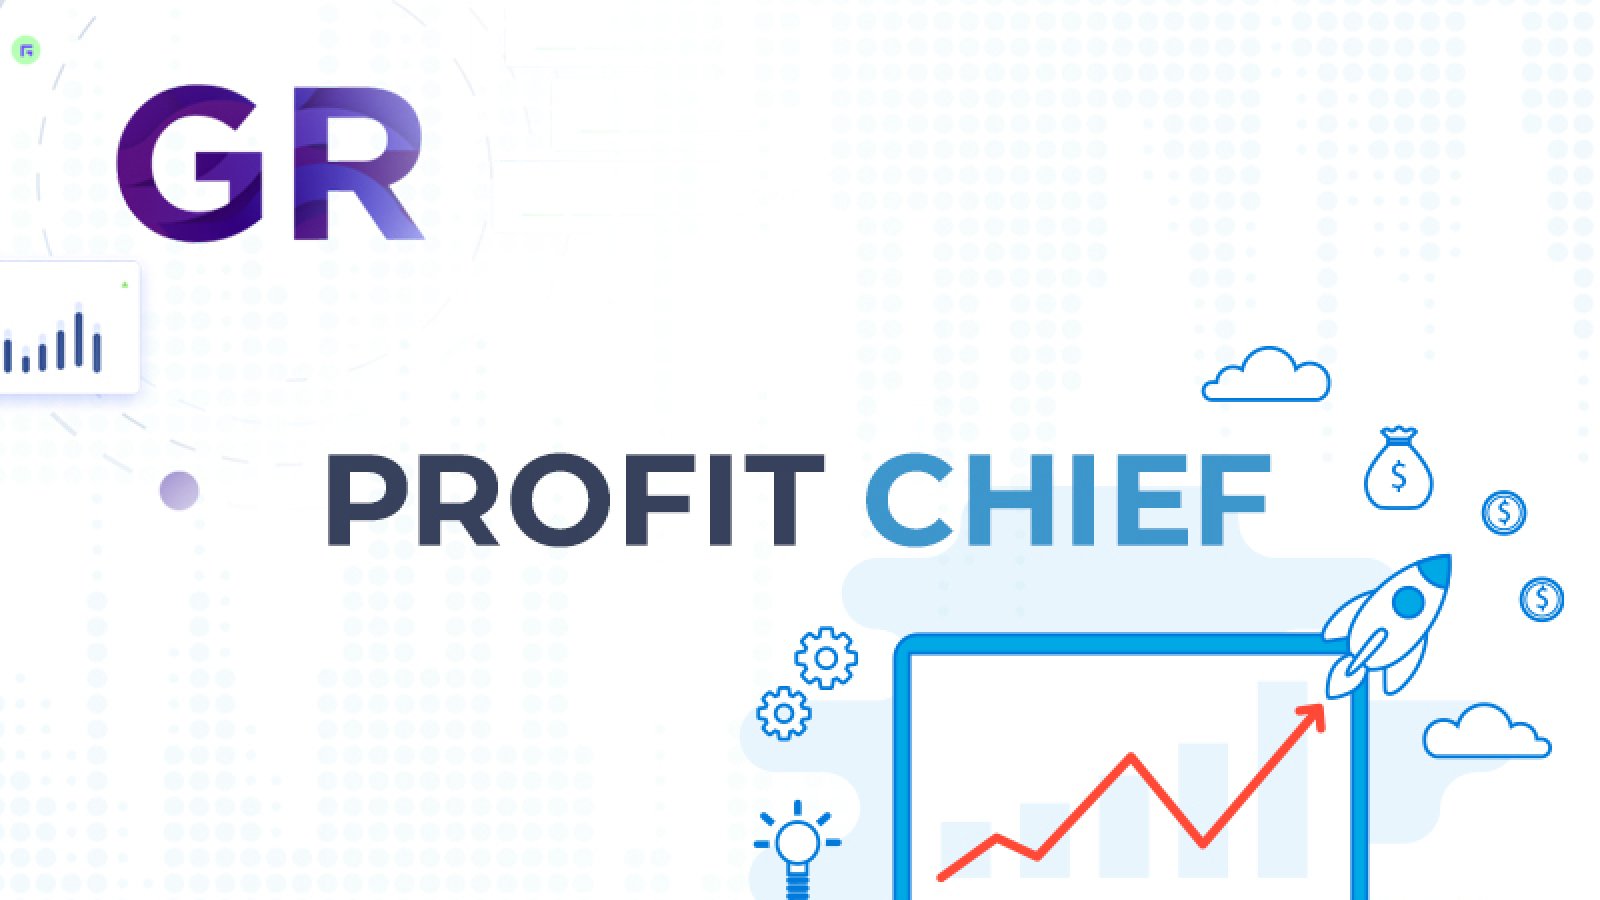 ProfitChief Service Launches AirDrop on Bitcoin.com Crypto Exchange